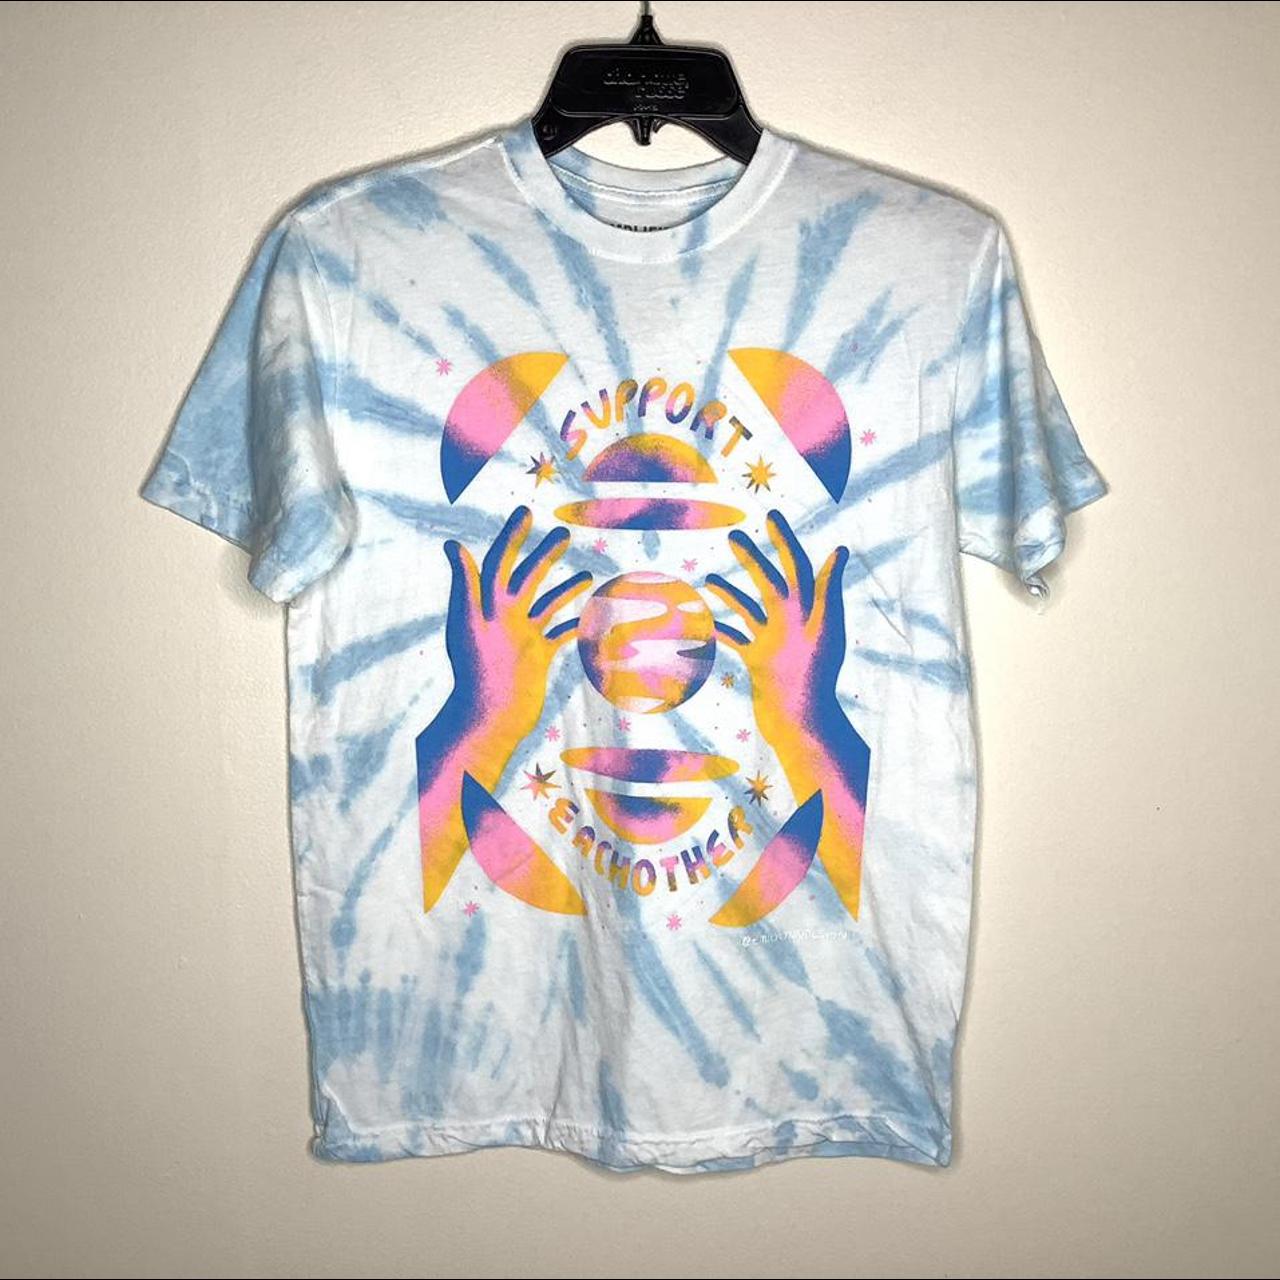 Product Image 1 - Support Each Other Tie Dye